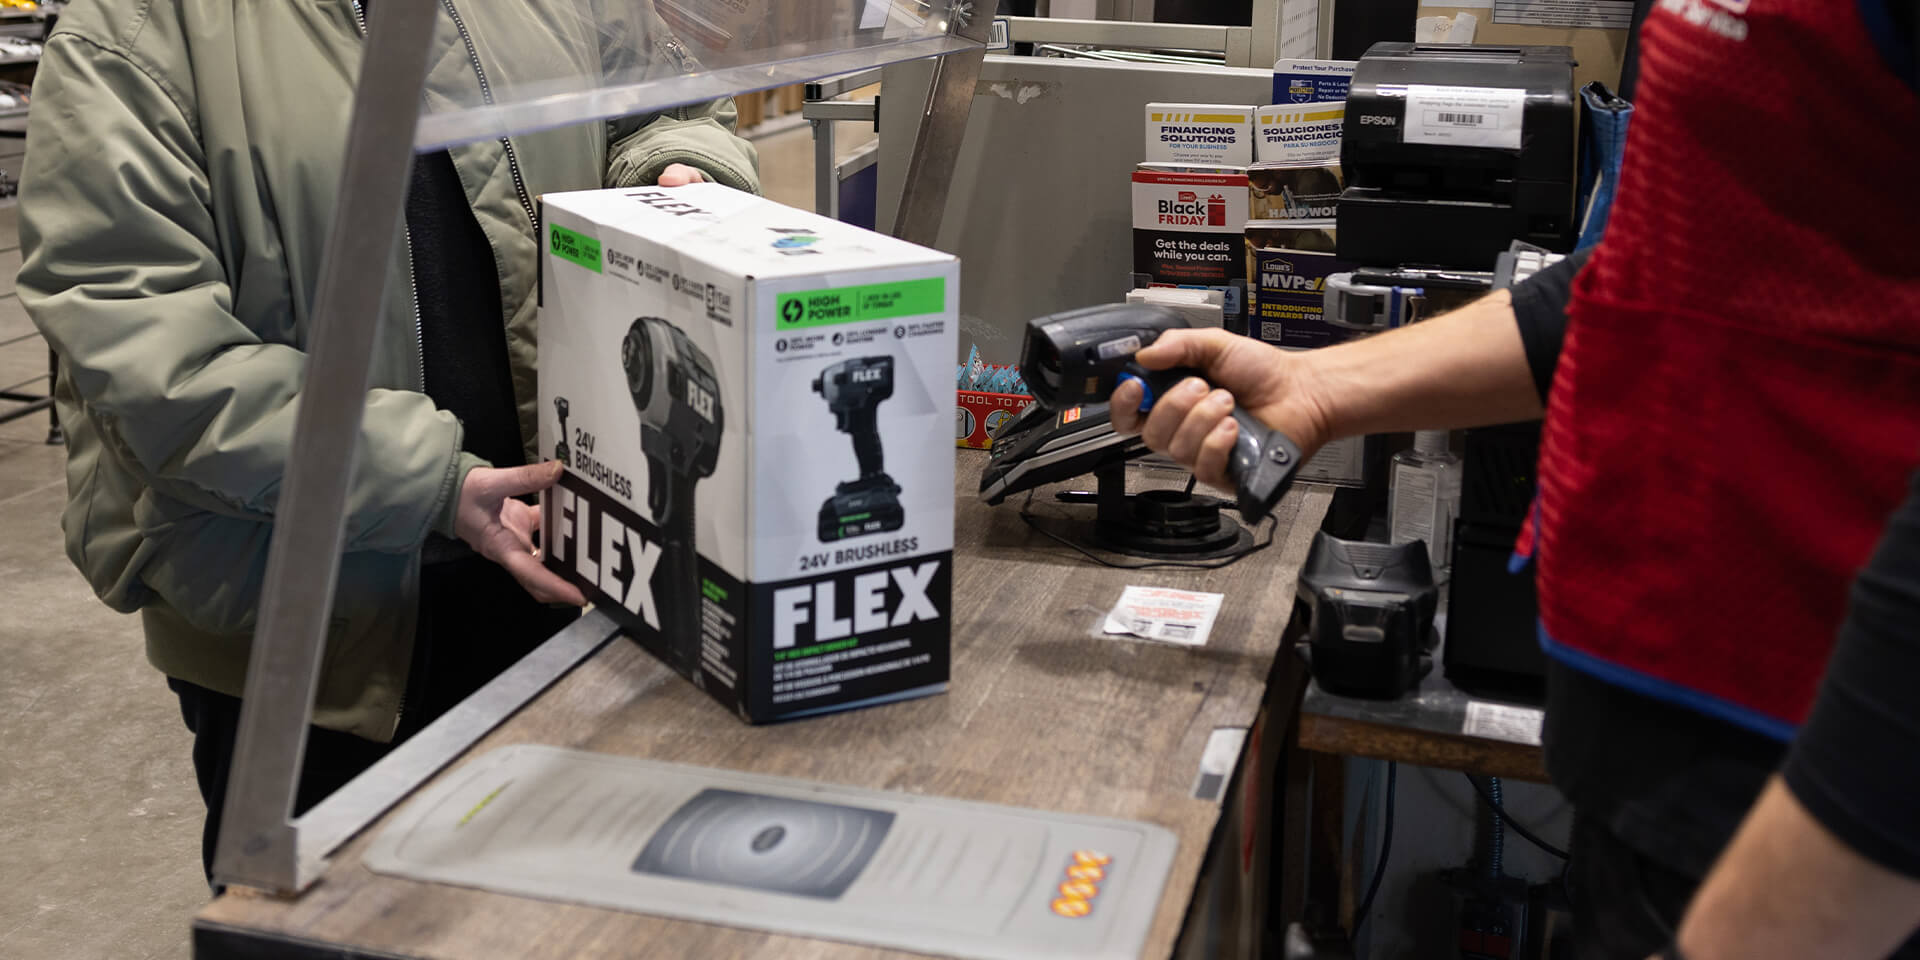 Customer purchasing a Flex brand drill, being checked out by a Lowes Home Improvement associate. 